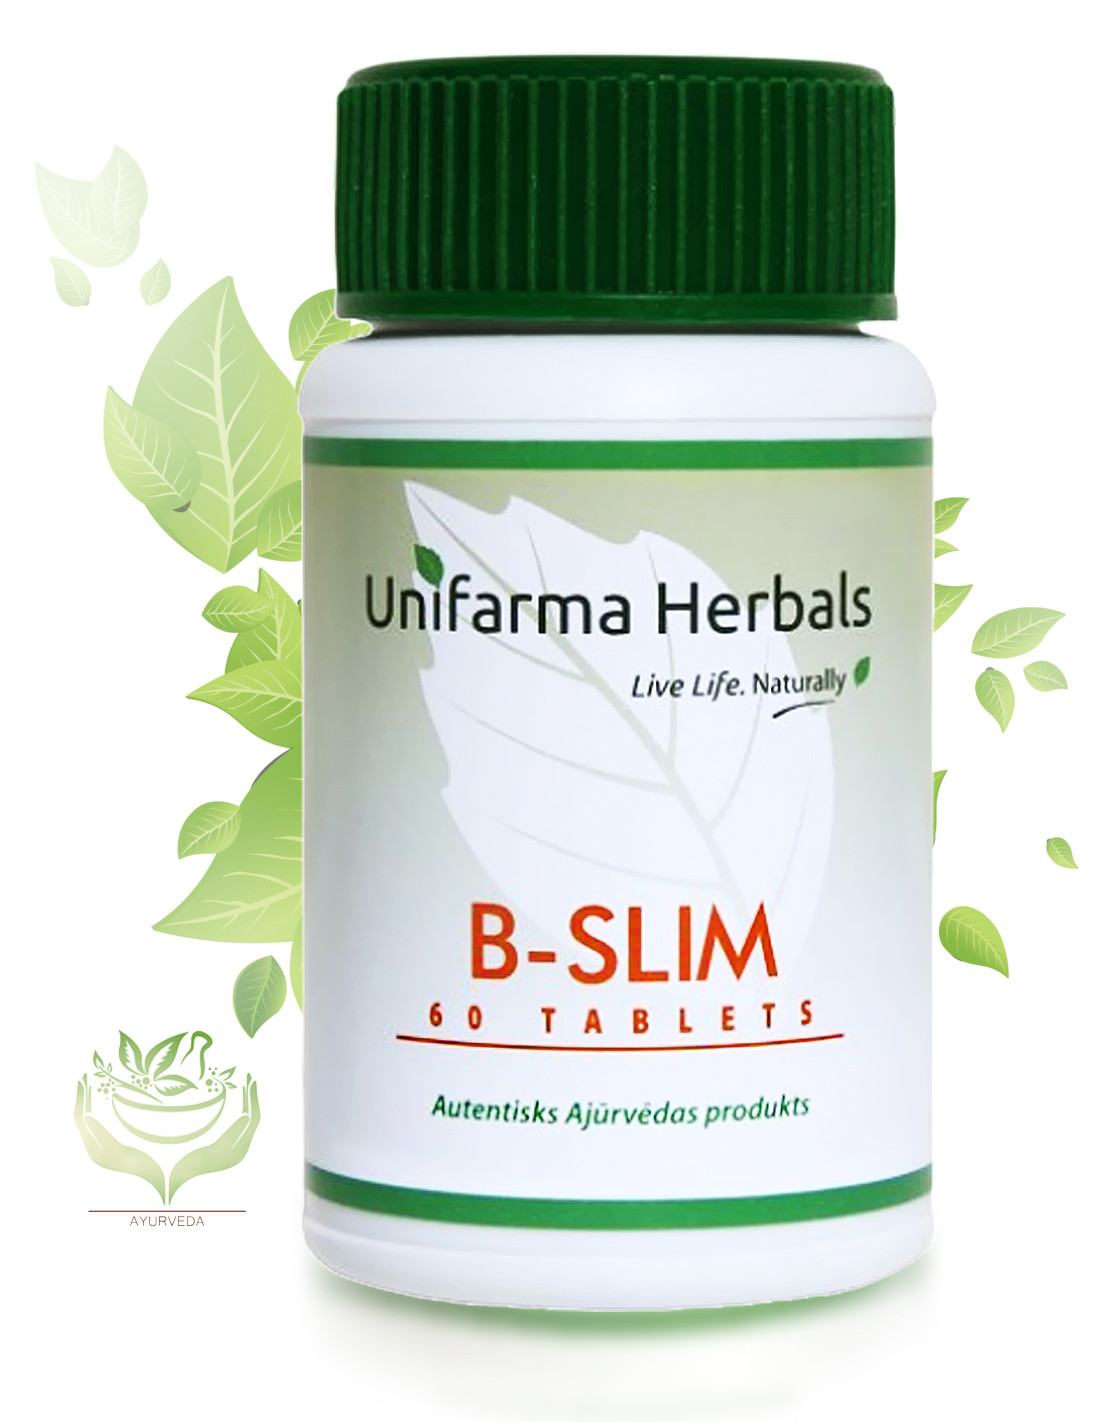 UNIFARMA HERBALS B-SLIM TABLETS N60 buy 10,50 € with delivery all over  Europe at